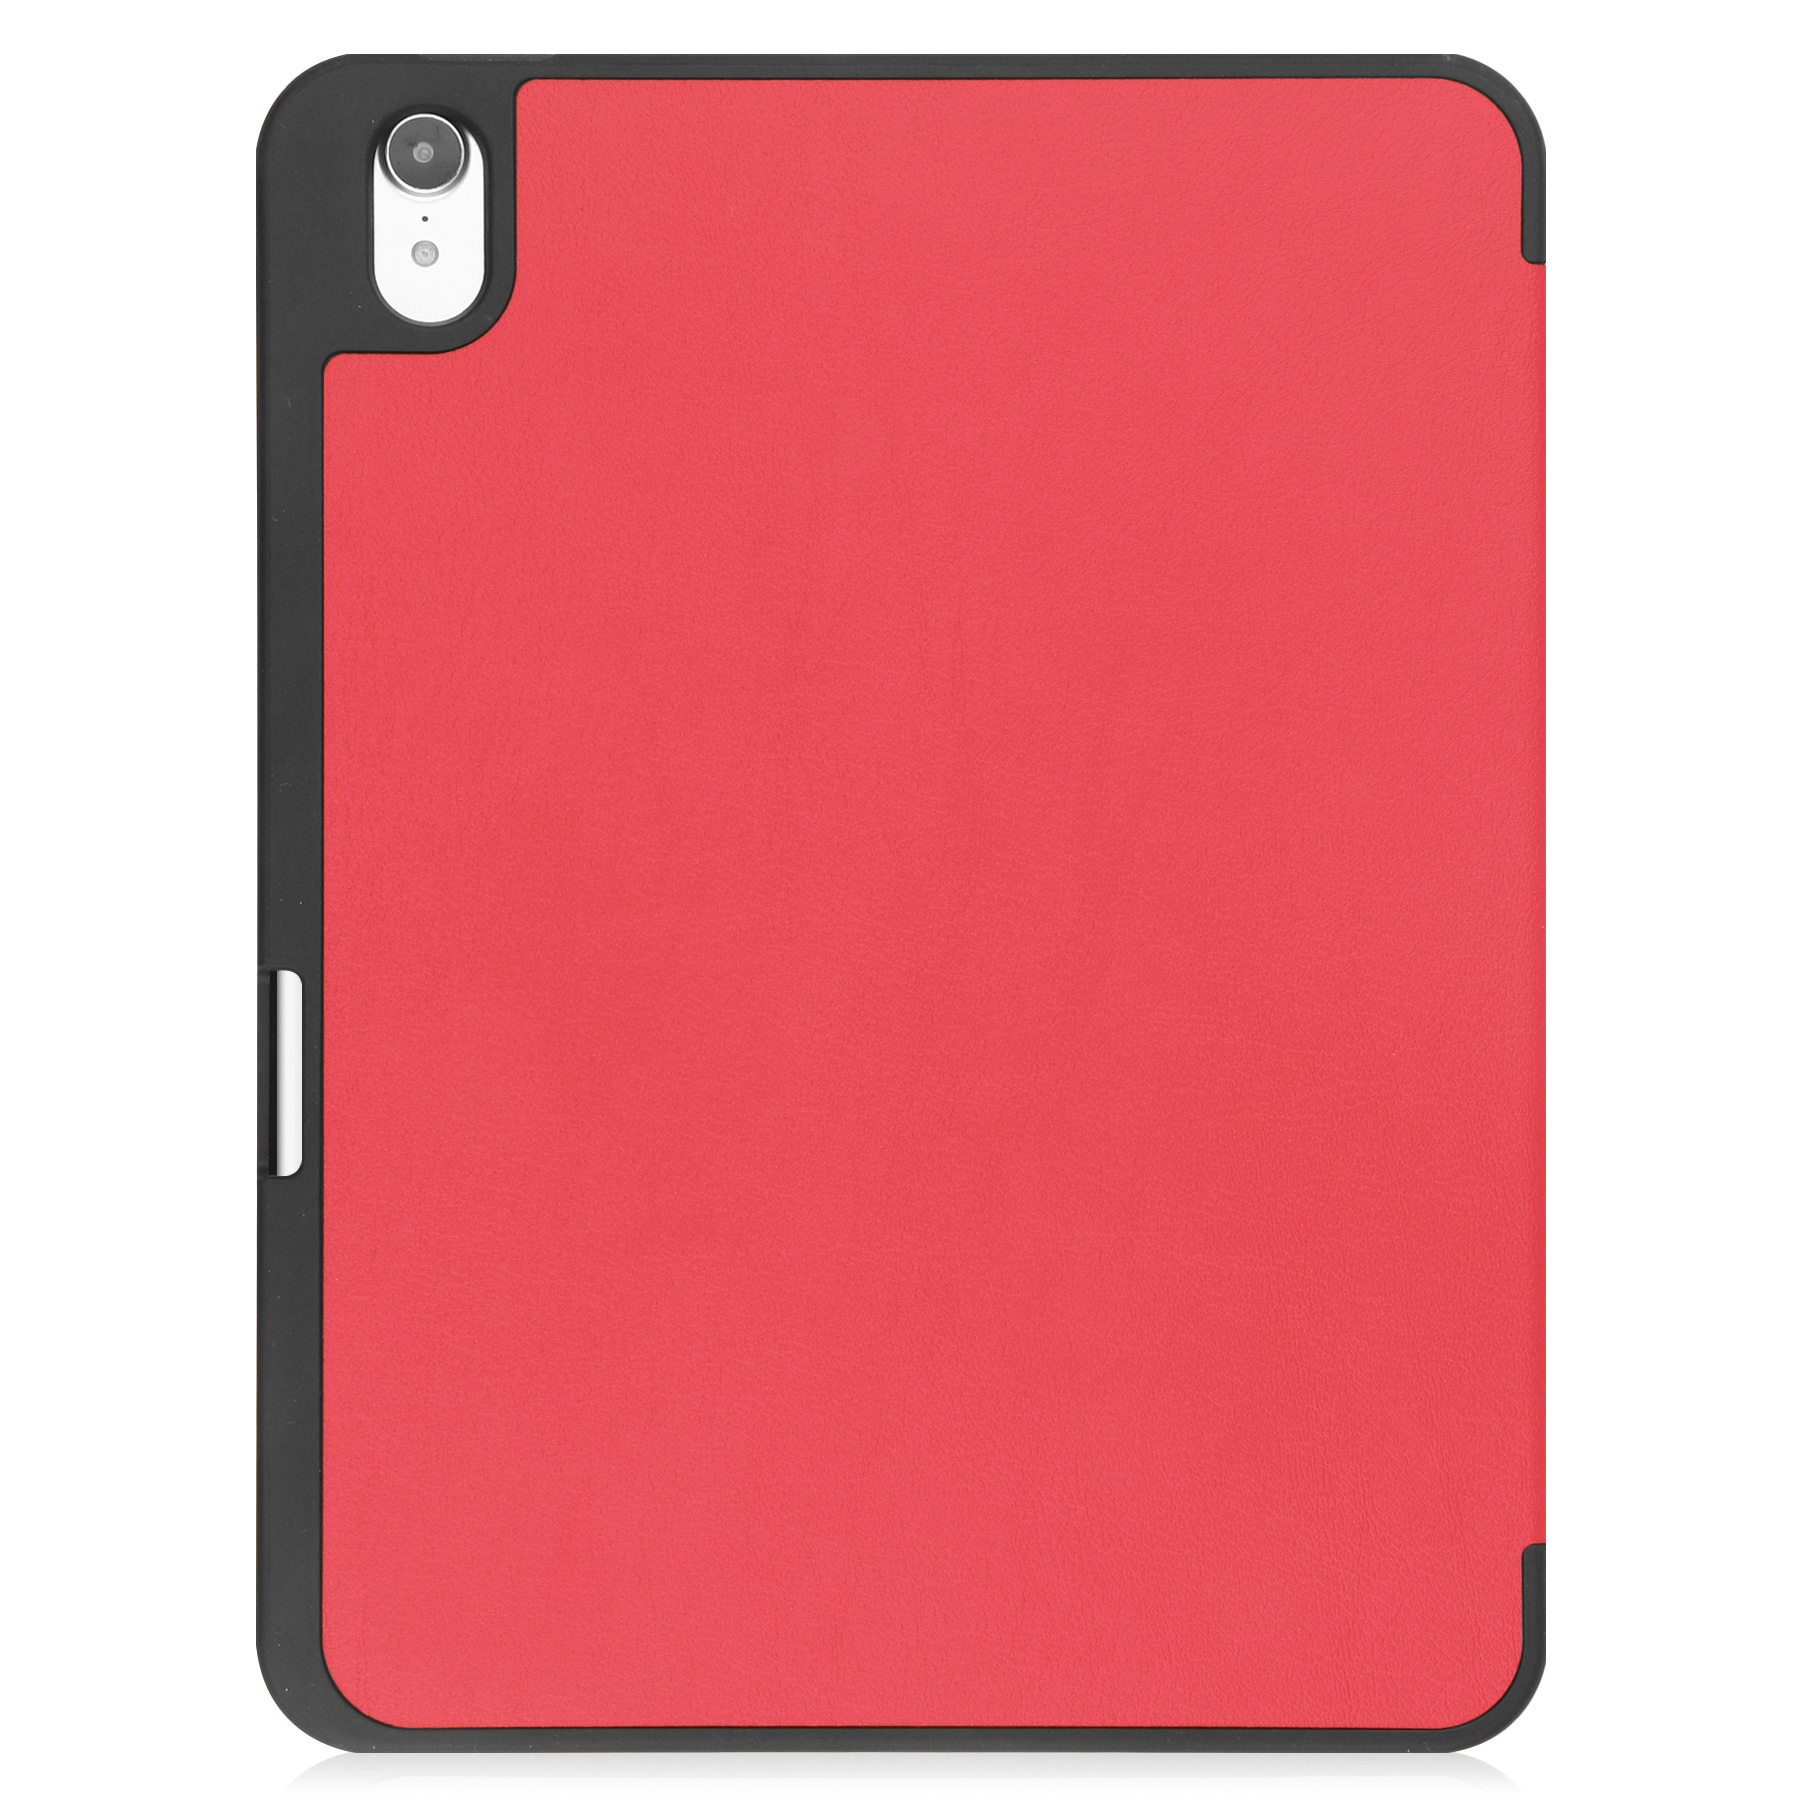 iPad 10 Hoes Case Hoesje Hard Cover - iPad 10 2022 Hoesje Bookcase Uitsparing Apple Pencil - Rood